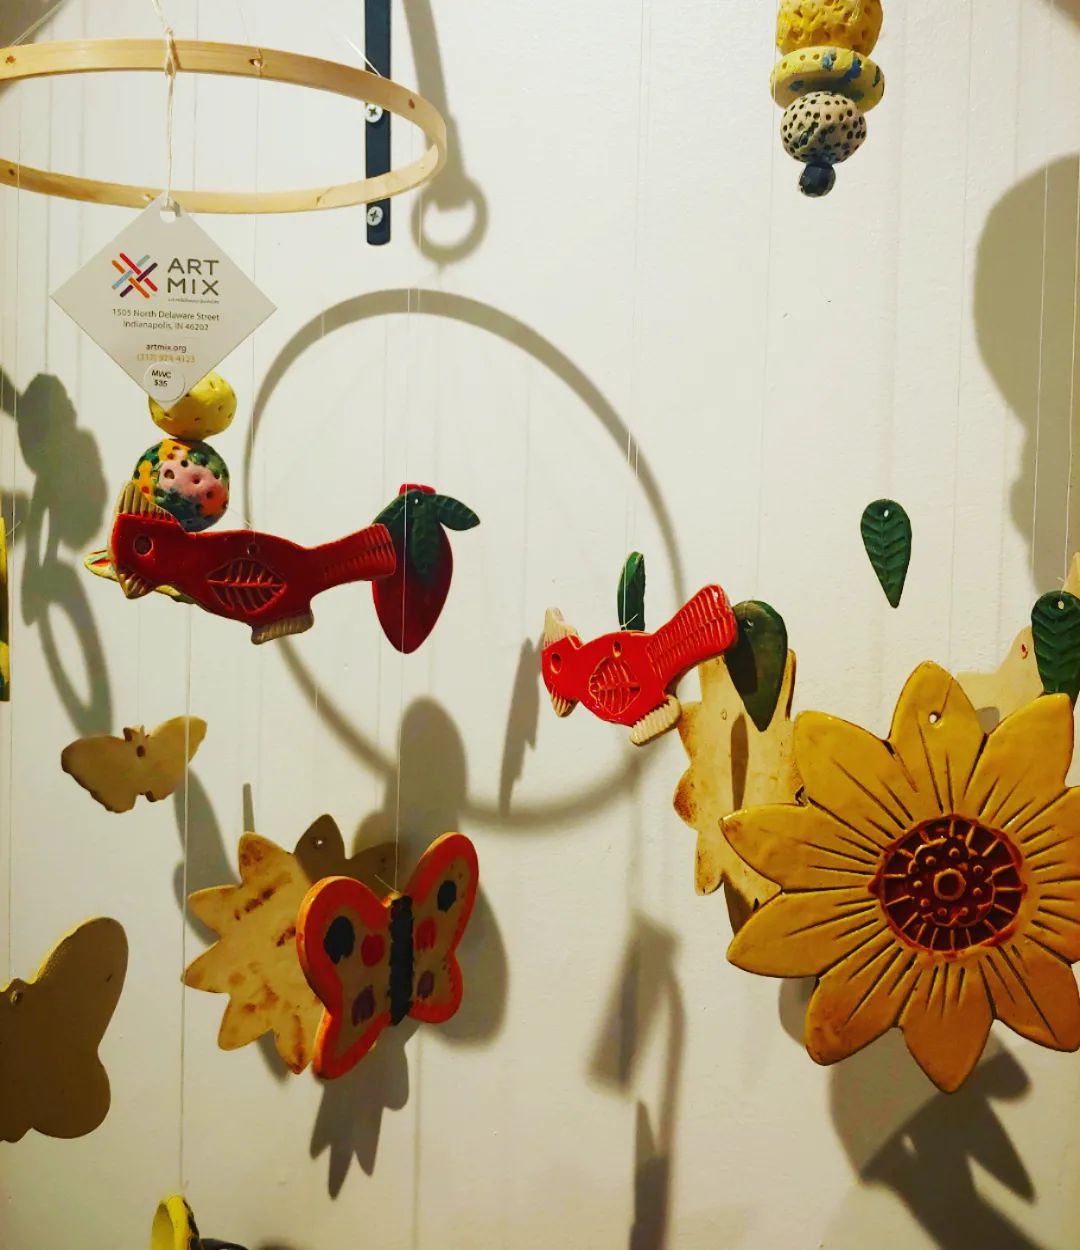 Photo featuring mobiles created through ArtMix featuring birds, butterflies and flowers